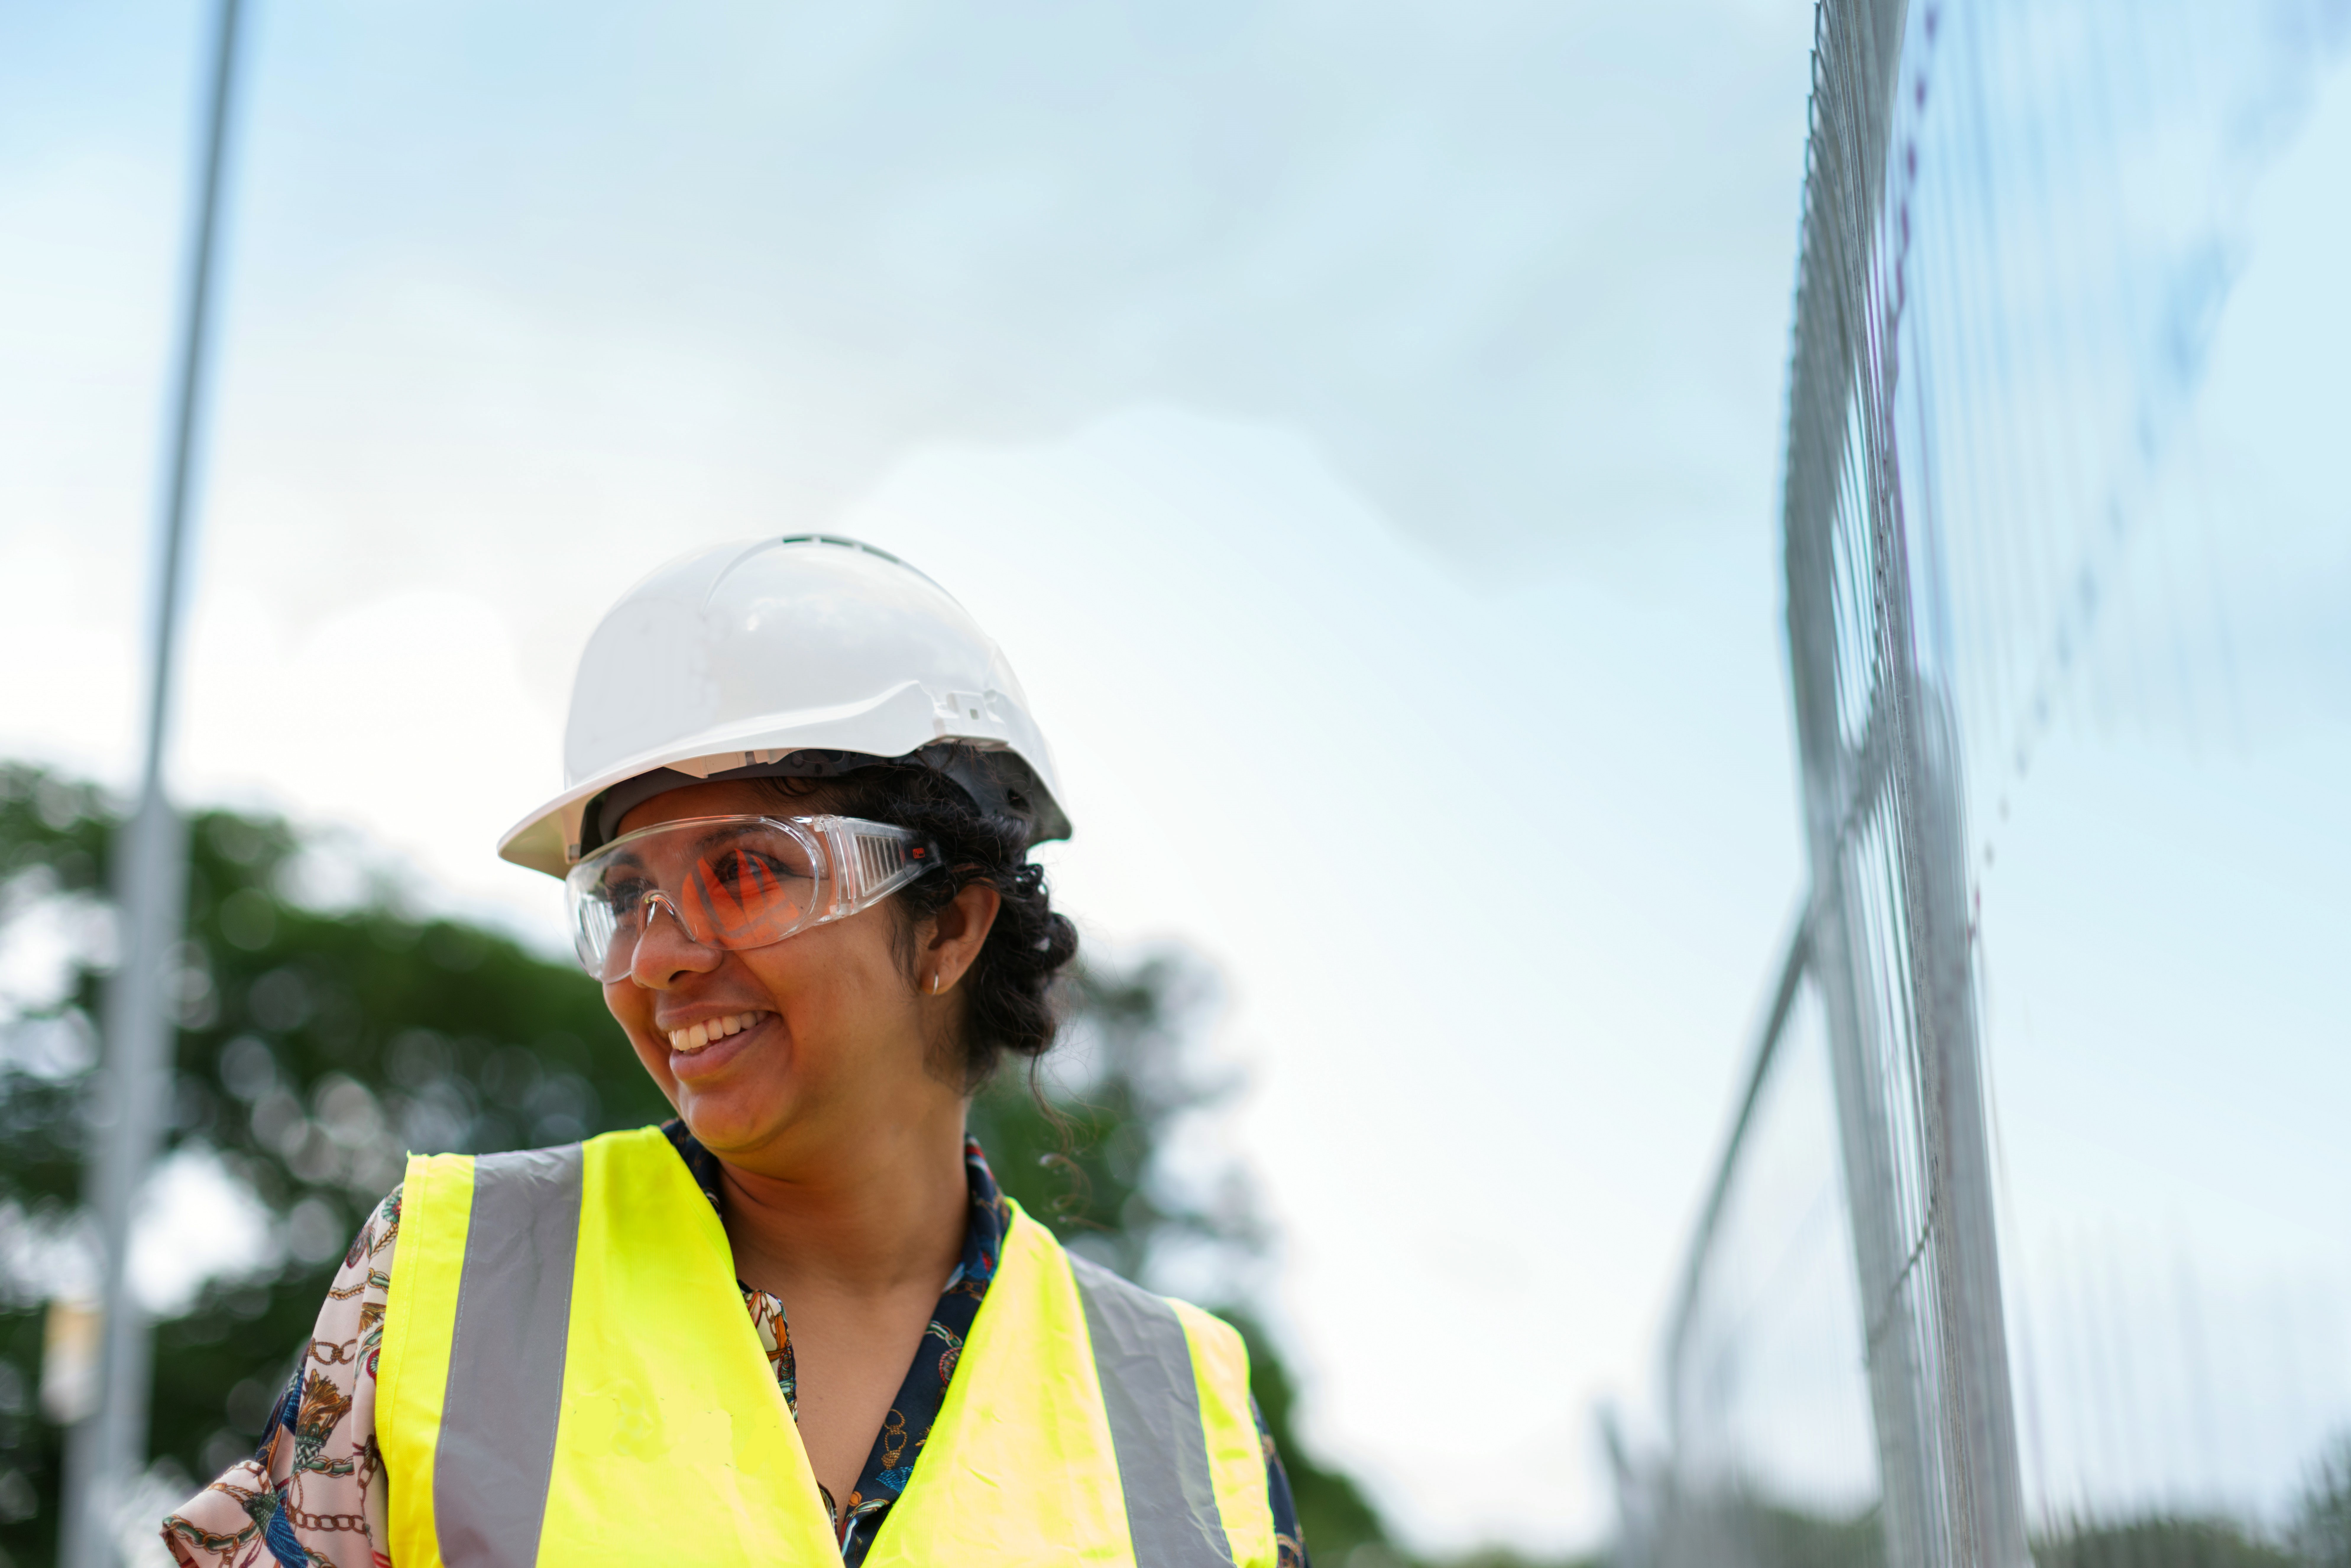 An image of a woman on a construction site.